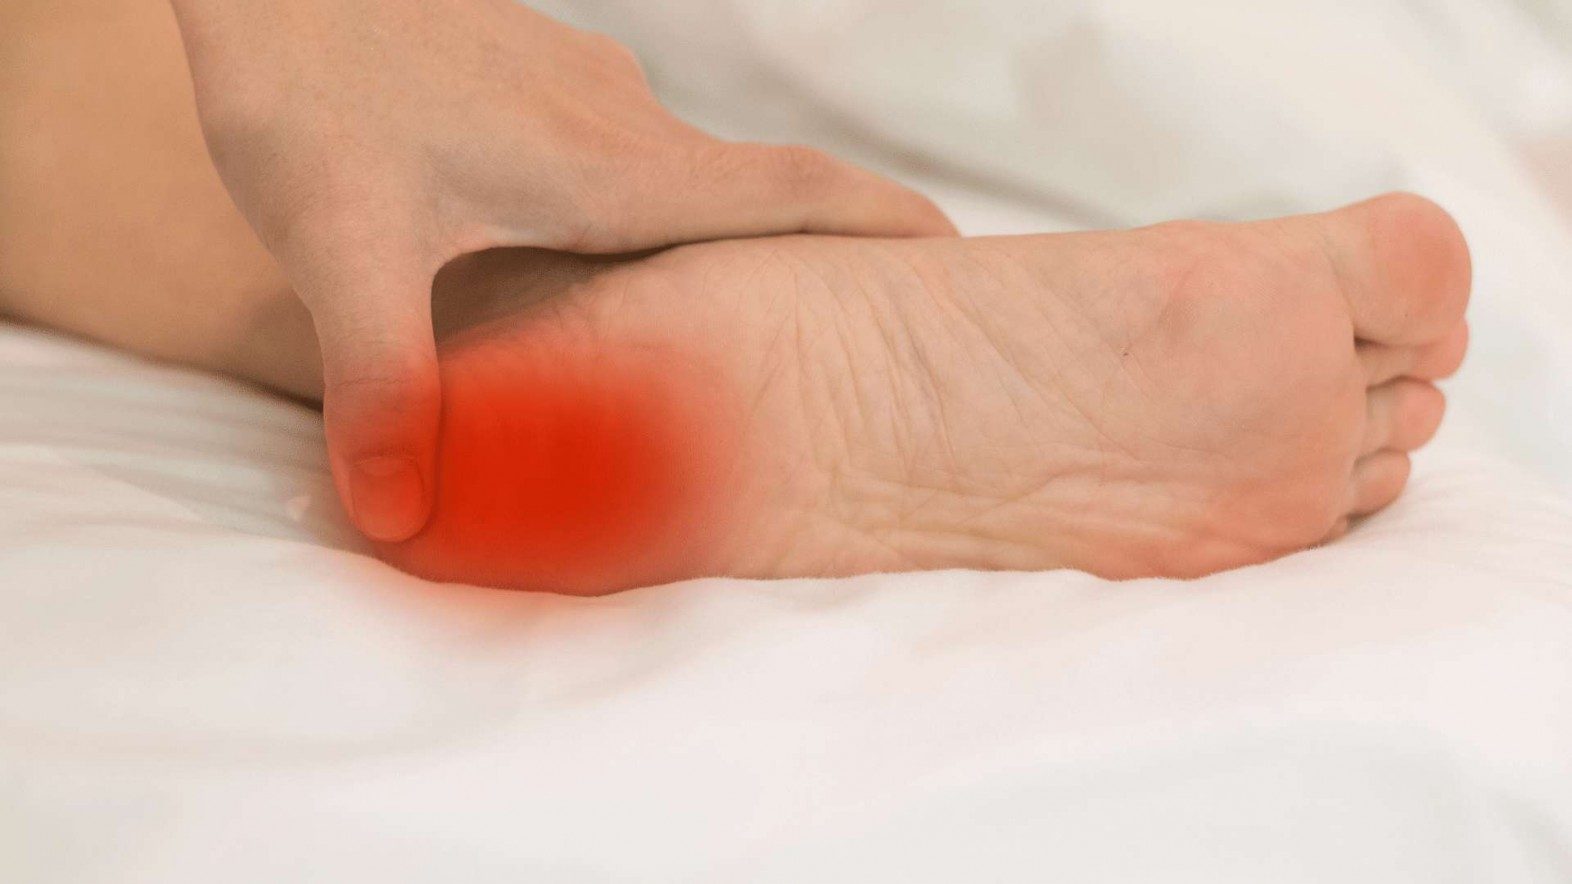 Plantar fasciitis-what you need to know. - Think Whole Person Healthcare